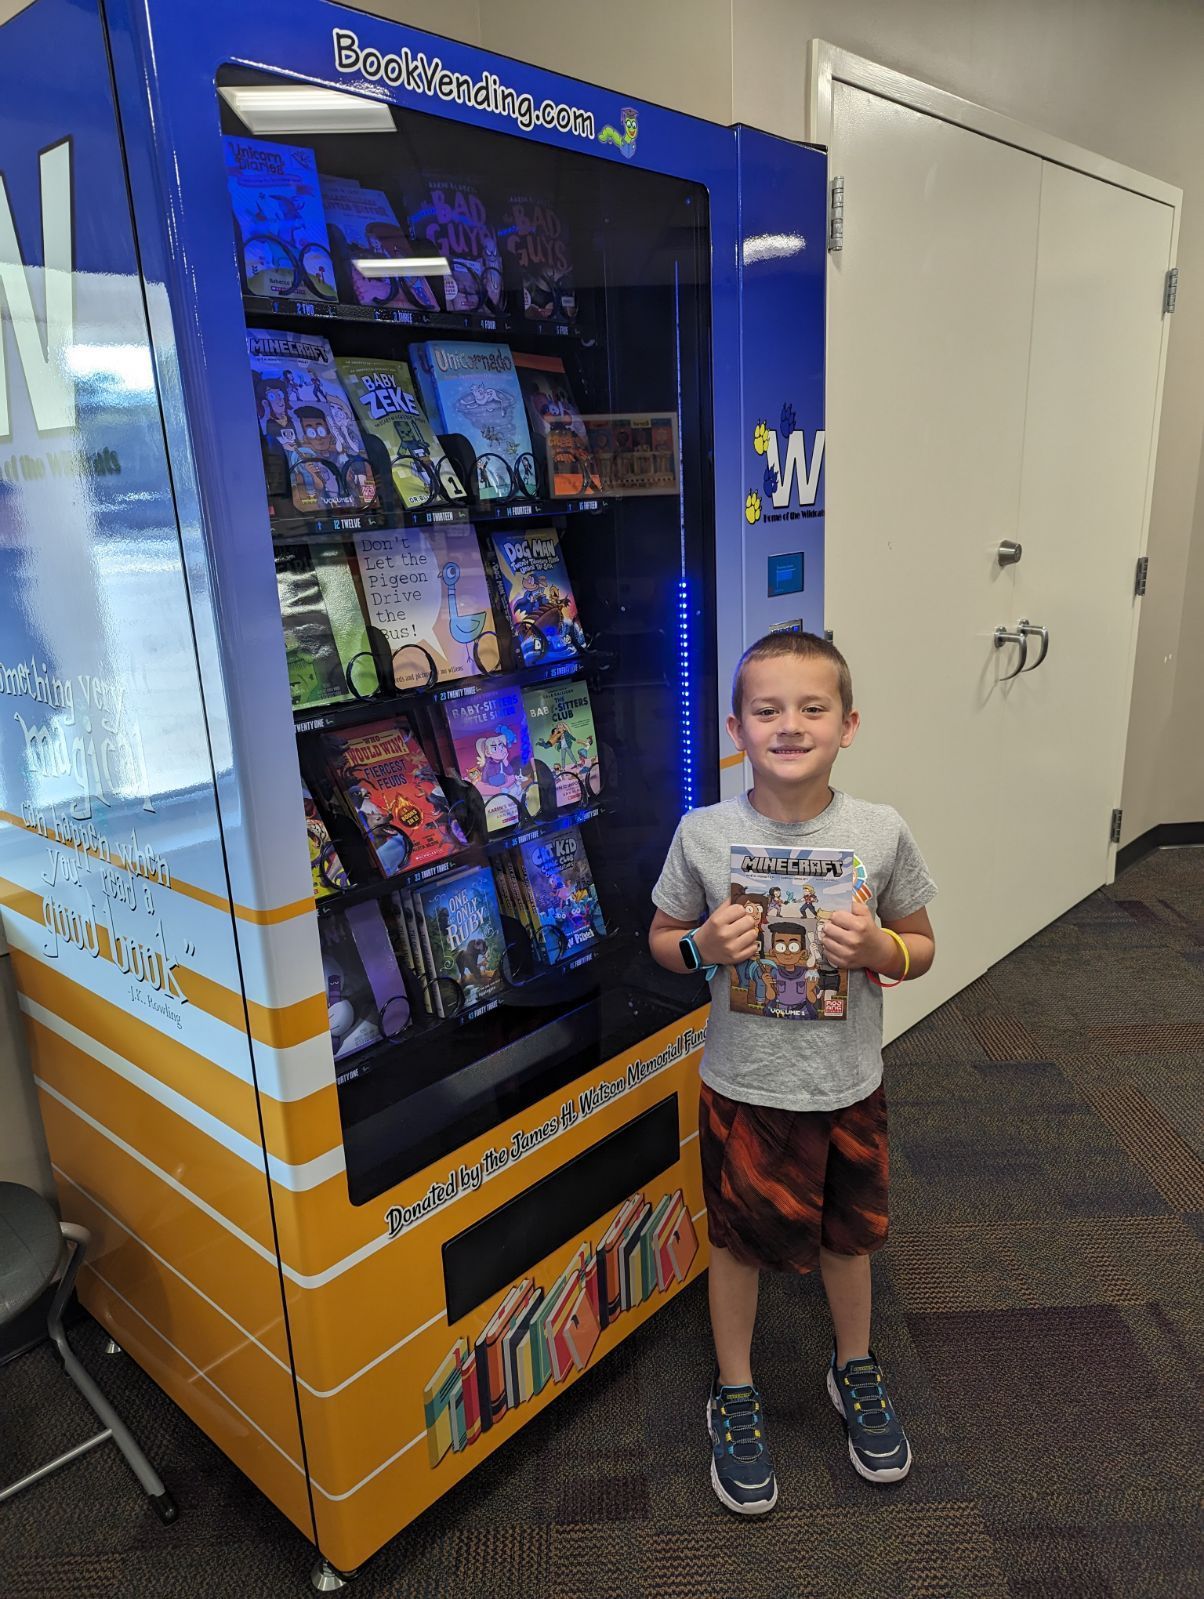 Ethan Augustyn is the first student at Watson to use the book vending machine in the office. Students receive a token on their birthday and are allowed to select a book from the vending machine.